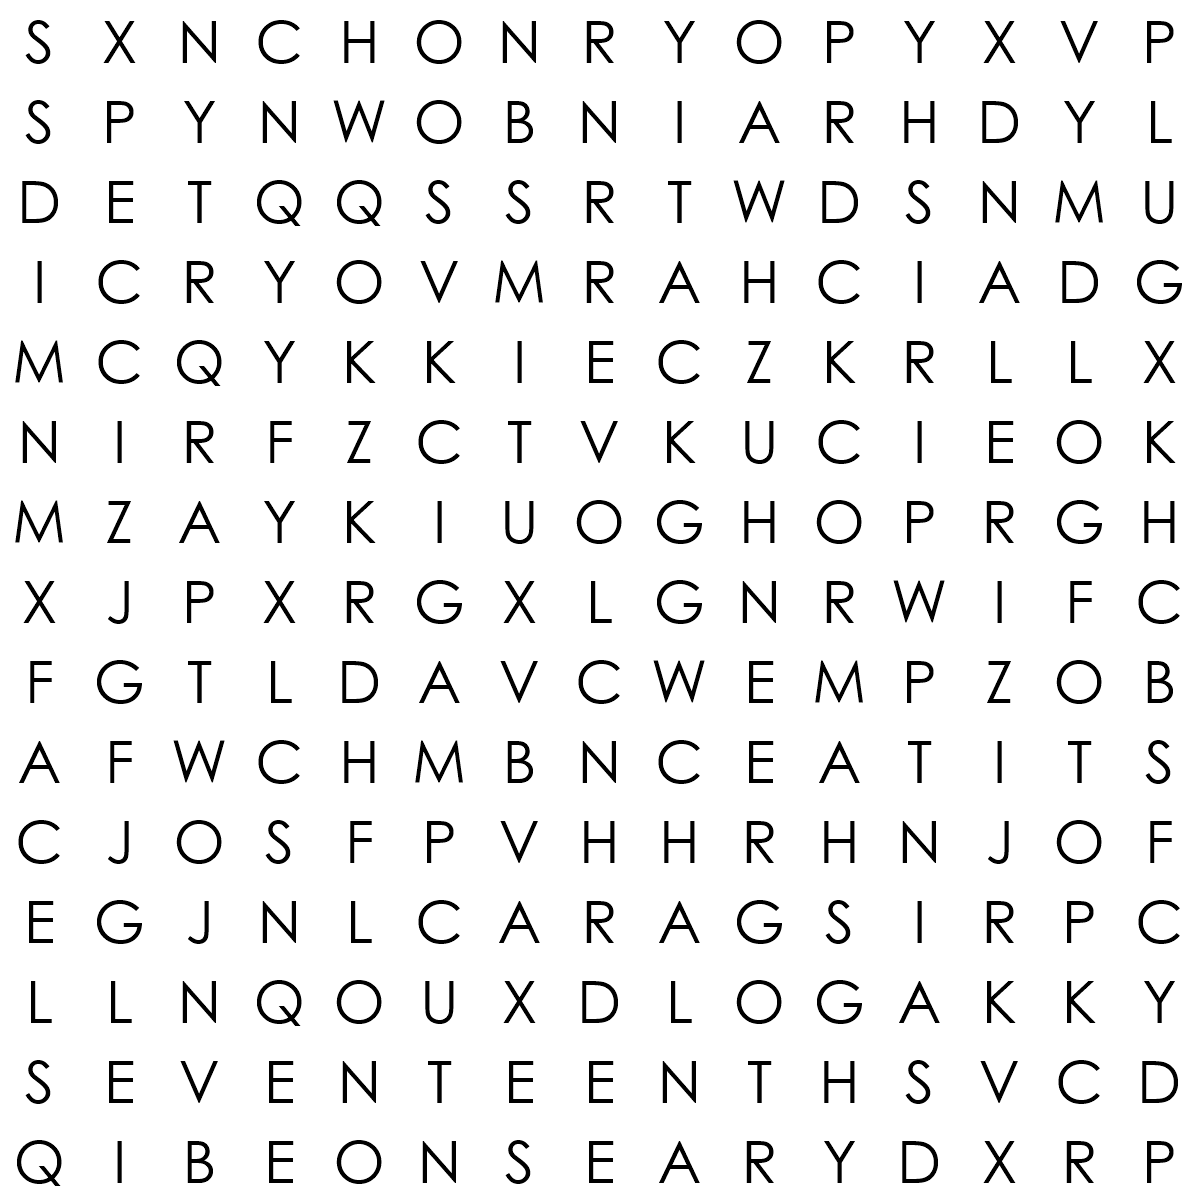 Simply Love PLR St. Patrick's Day Word Search Template